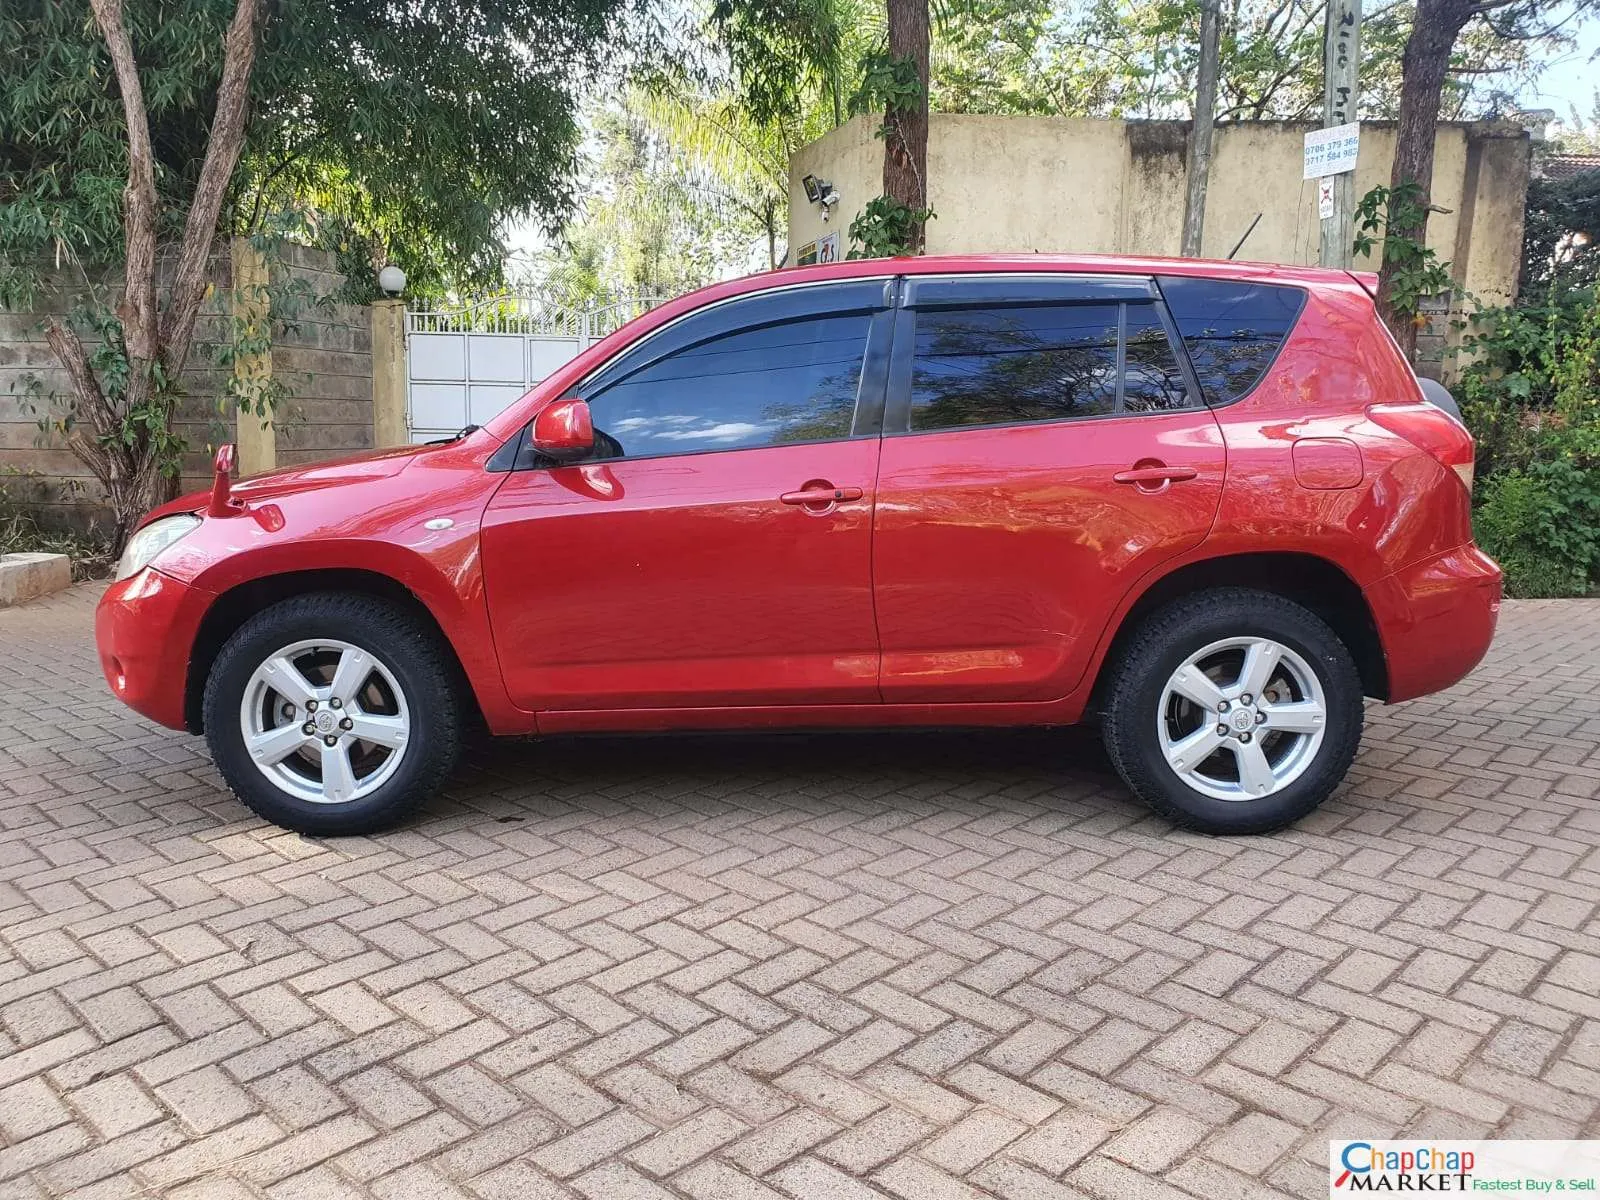 Cars Cars For Sale Language-Toyota RAV4 CHEAPEST You Pay 30% Deposit 70% installments Trade in OK 9